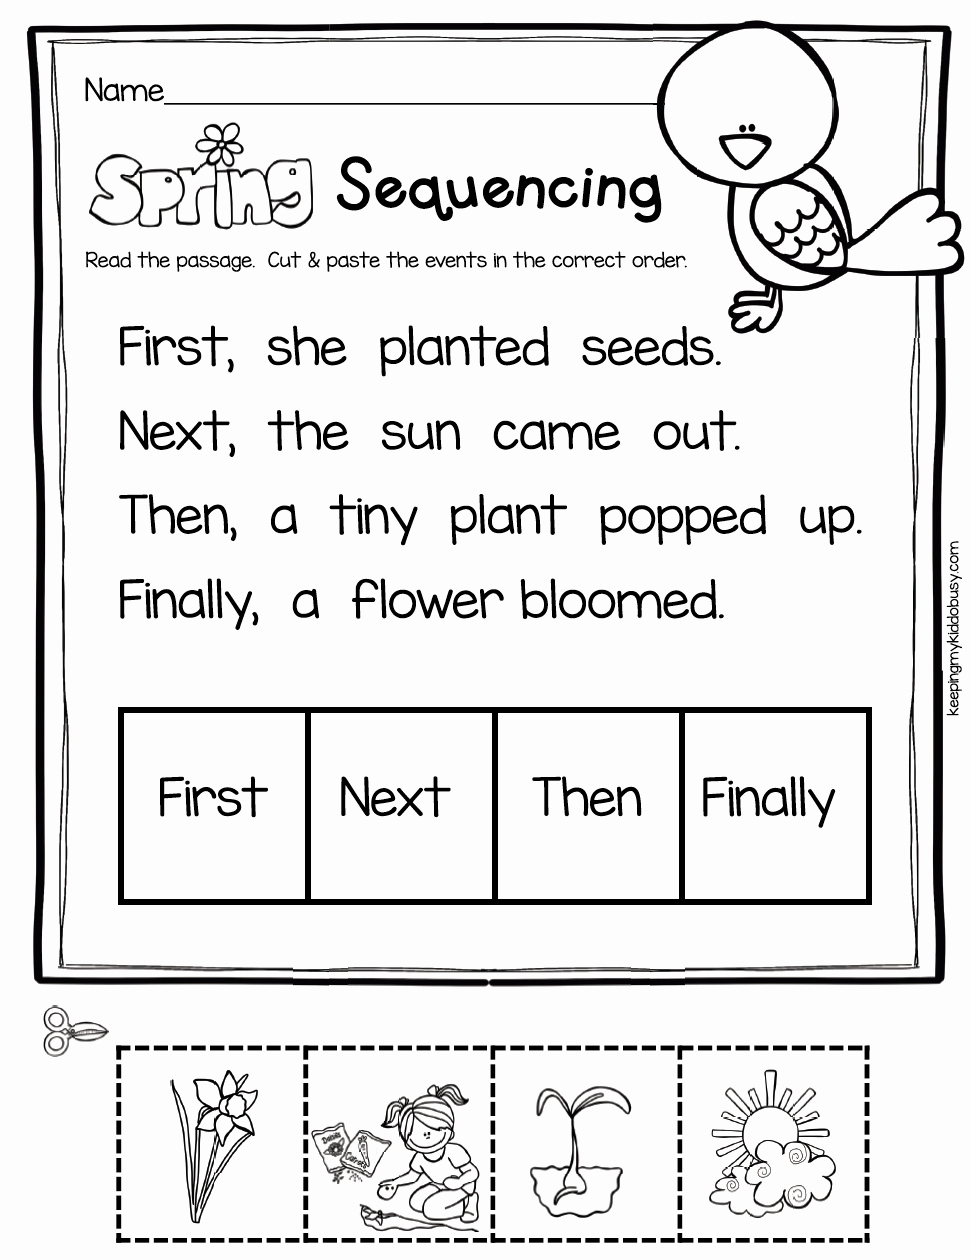 Sequence Worksheets for Kindergarten Awesome Number Sequence Worksheets for Kindergarten